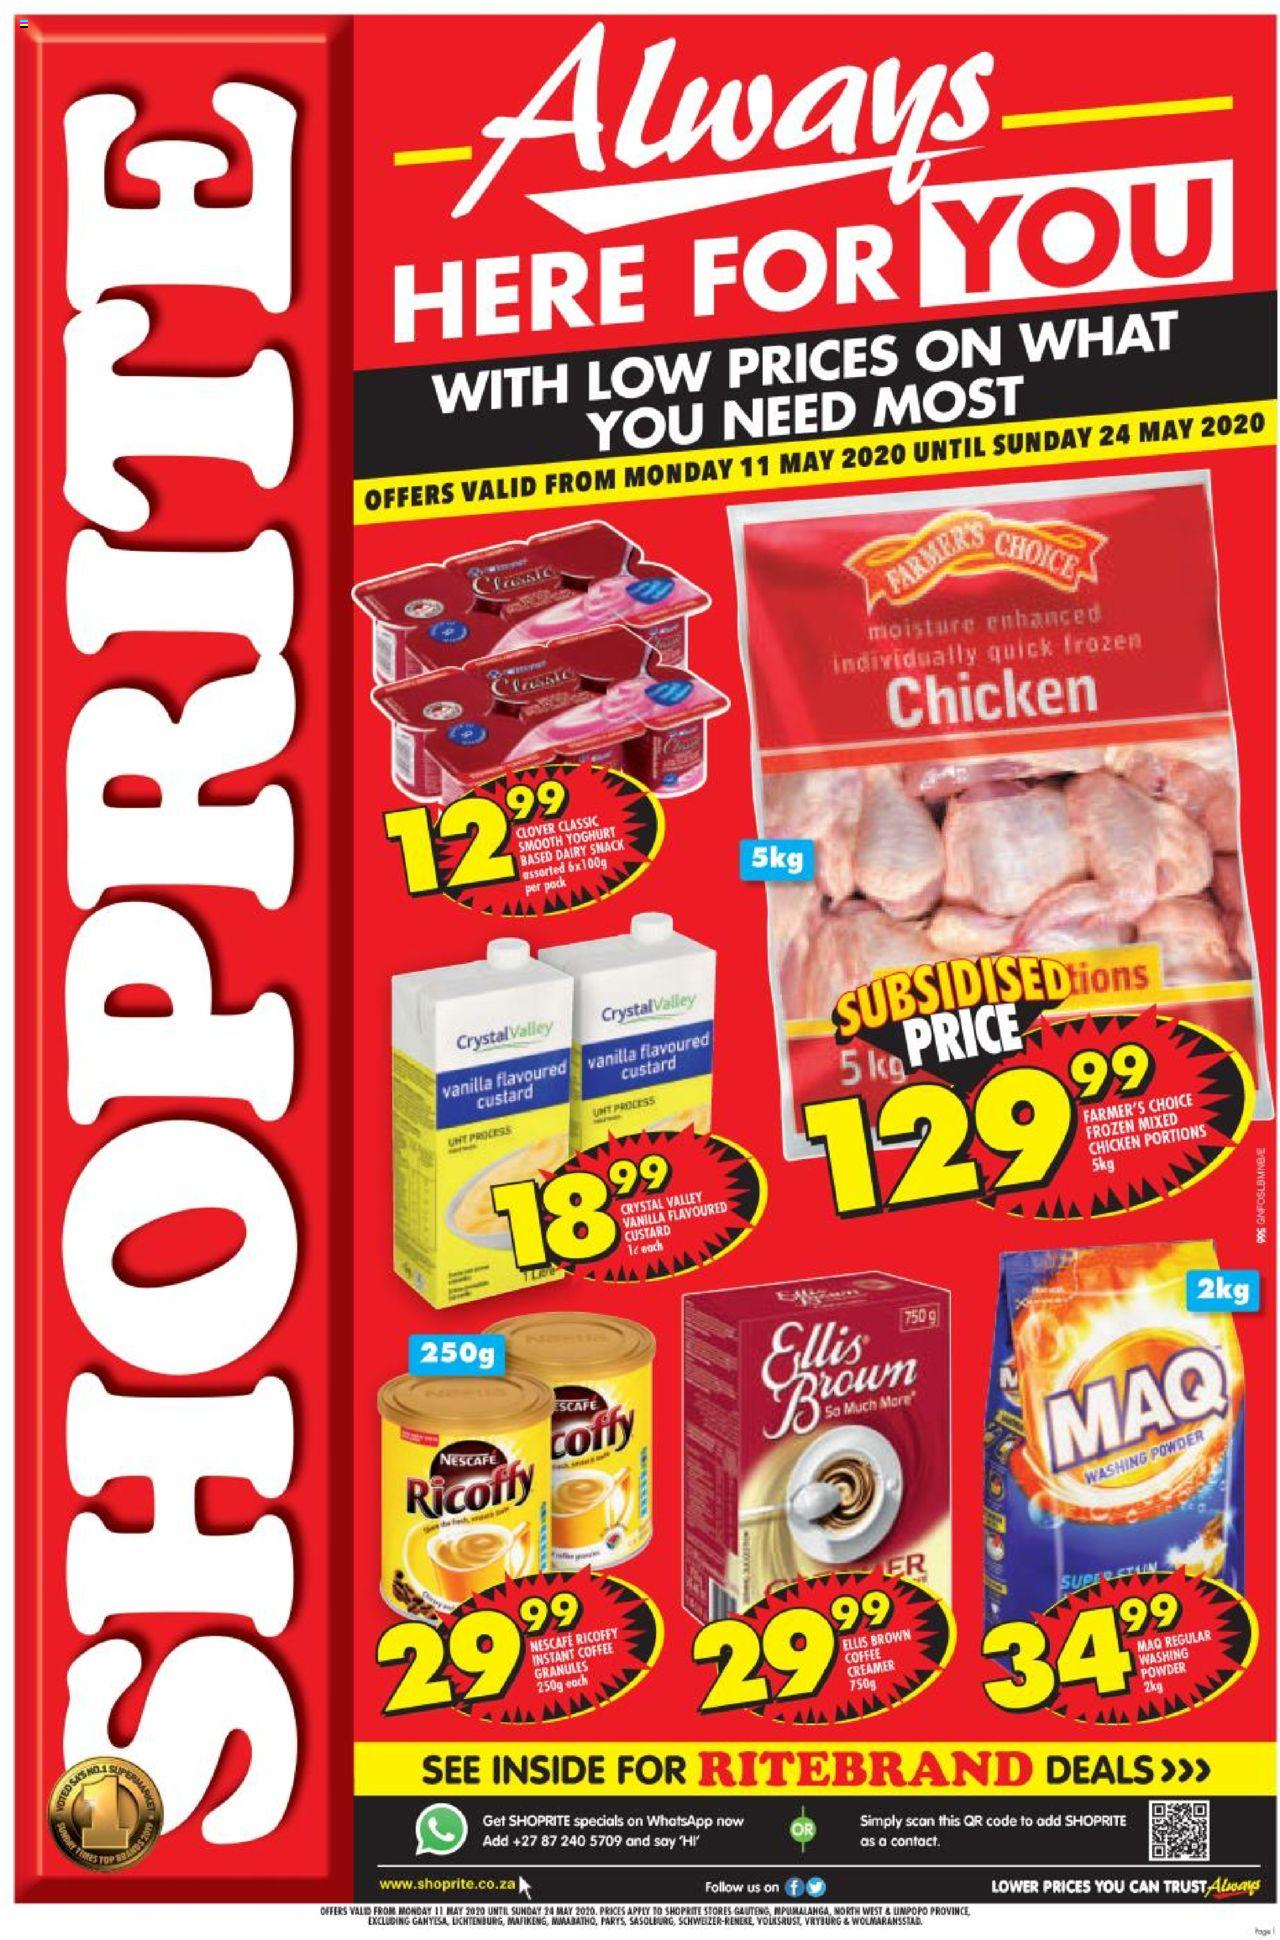 Shoprite Specials Always Here For You 11 May 2020